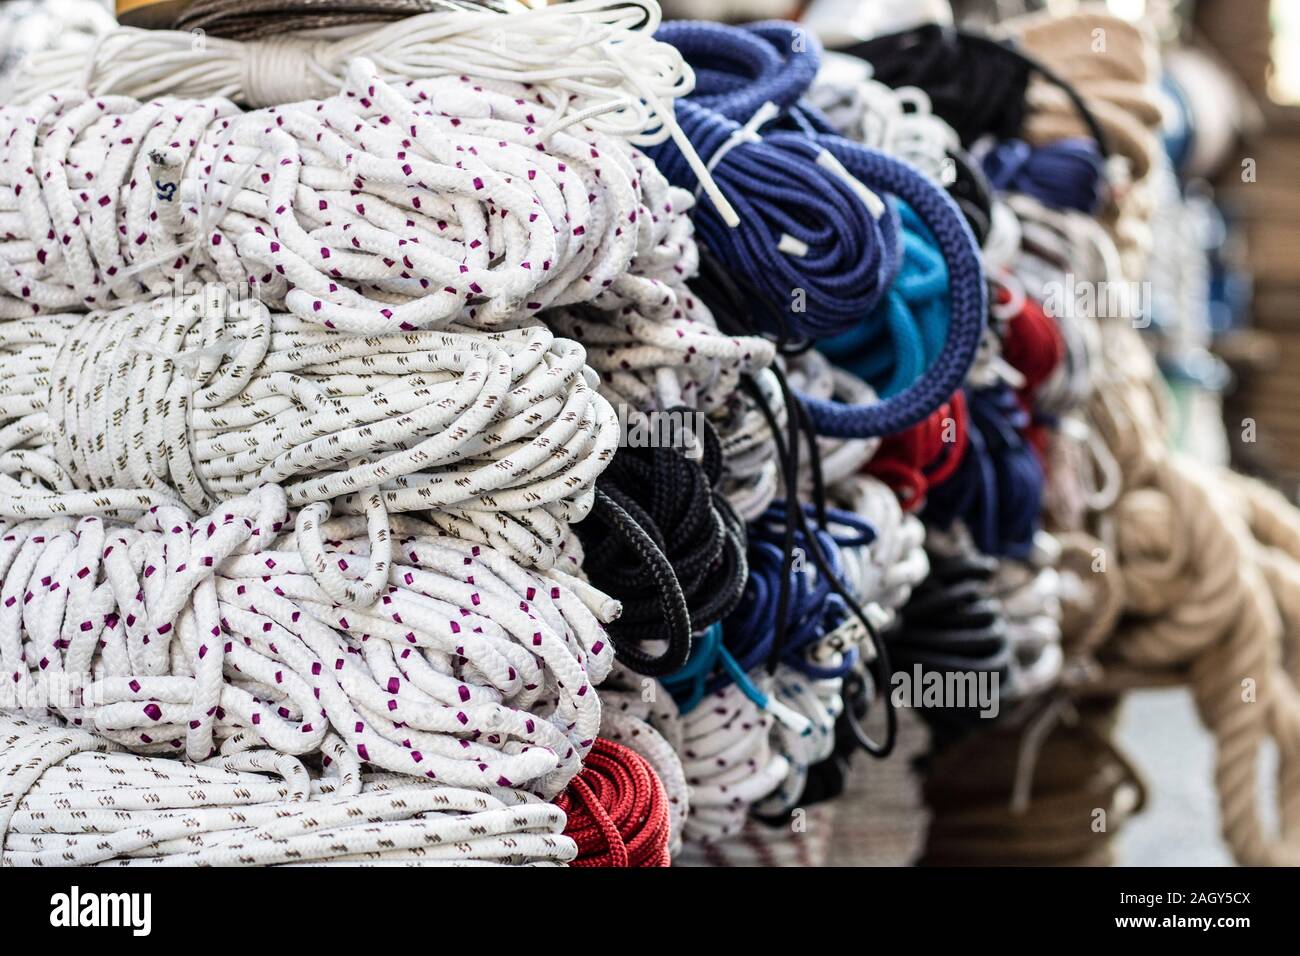 Climbing equipment: dynamic rope, set of climbing chocks, quickdraws and belay device Stock Photo